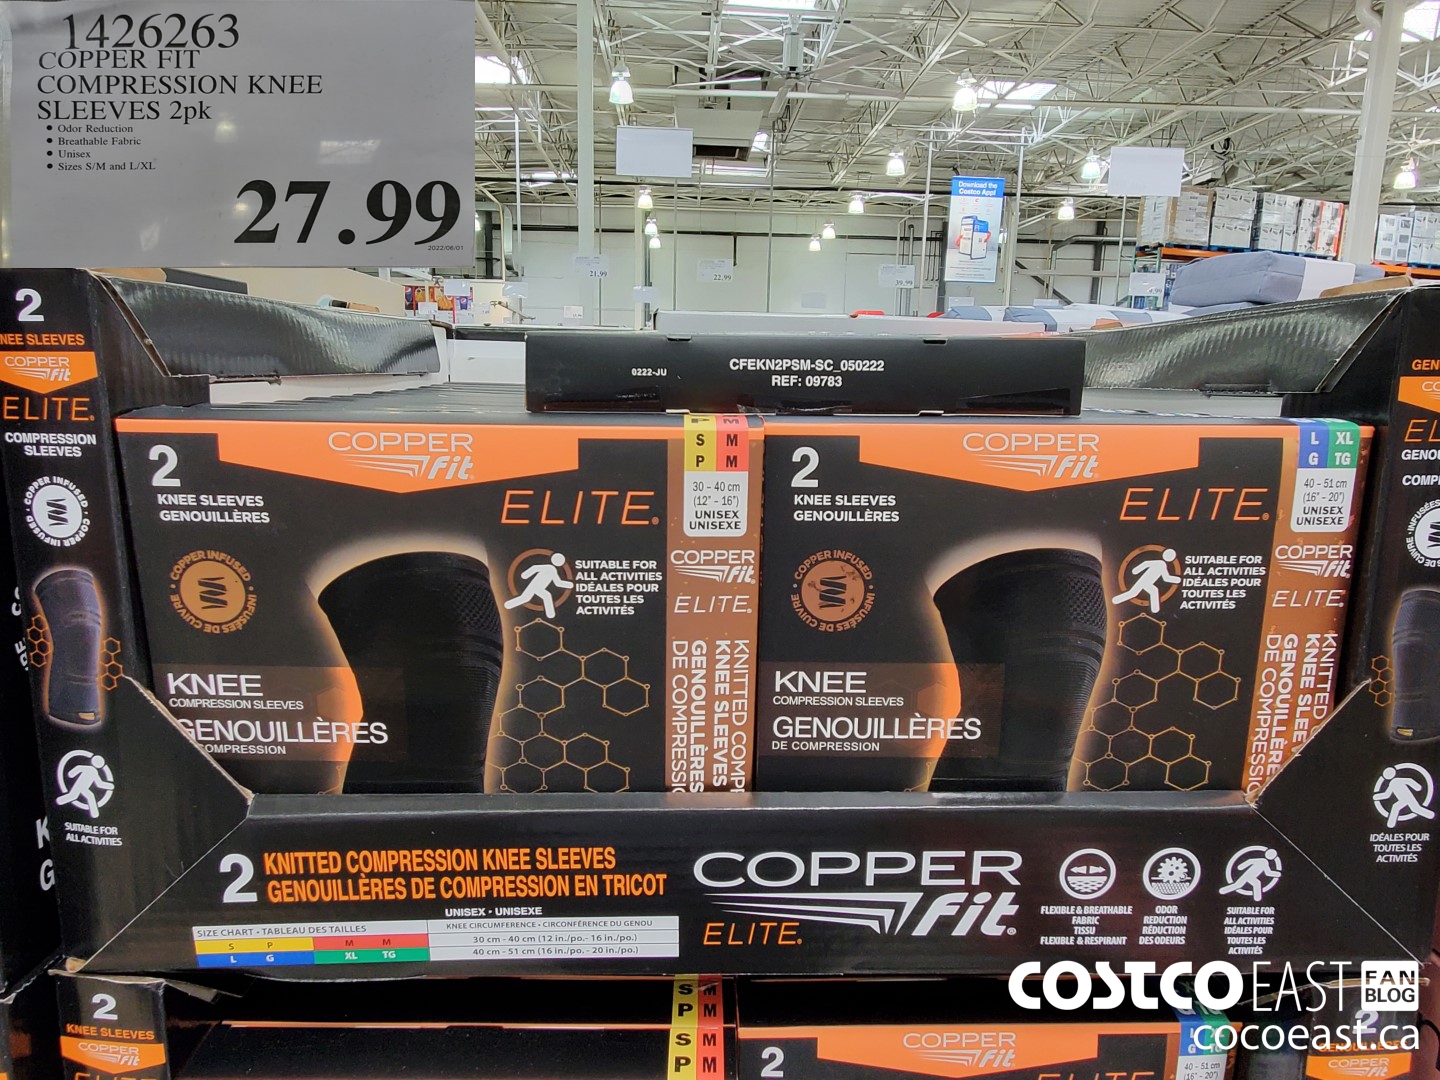 1426263 COPPER FIT COMPRESSION KNEE SLEEVES 2pk 27 99 - Costco East Fan Blog